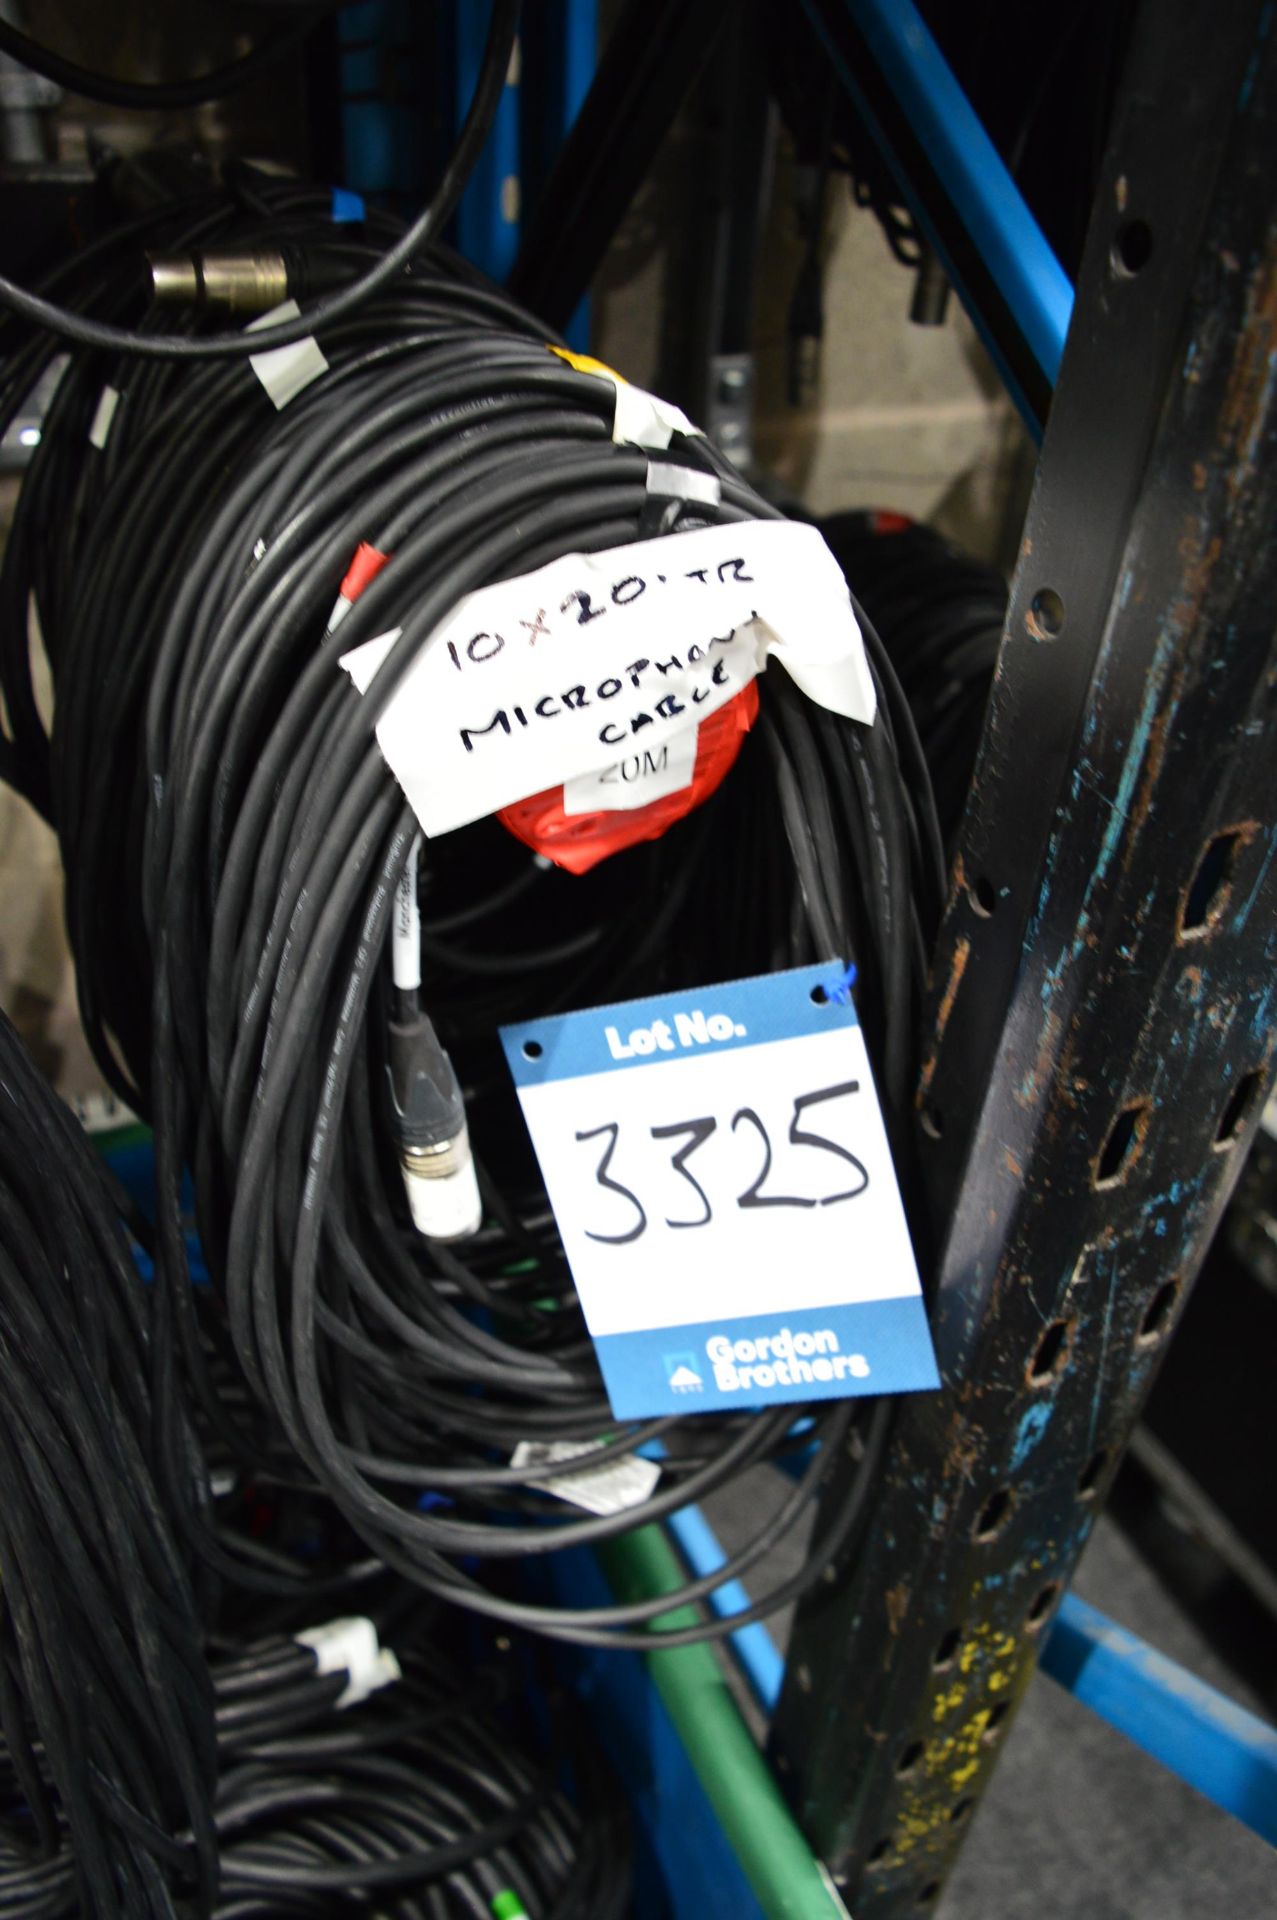 20x 20m microphone cables: Unit 500, Eckersall Road, Birmingham B38 8SE - Image 3 of 3